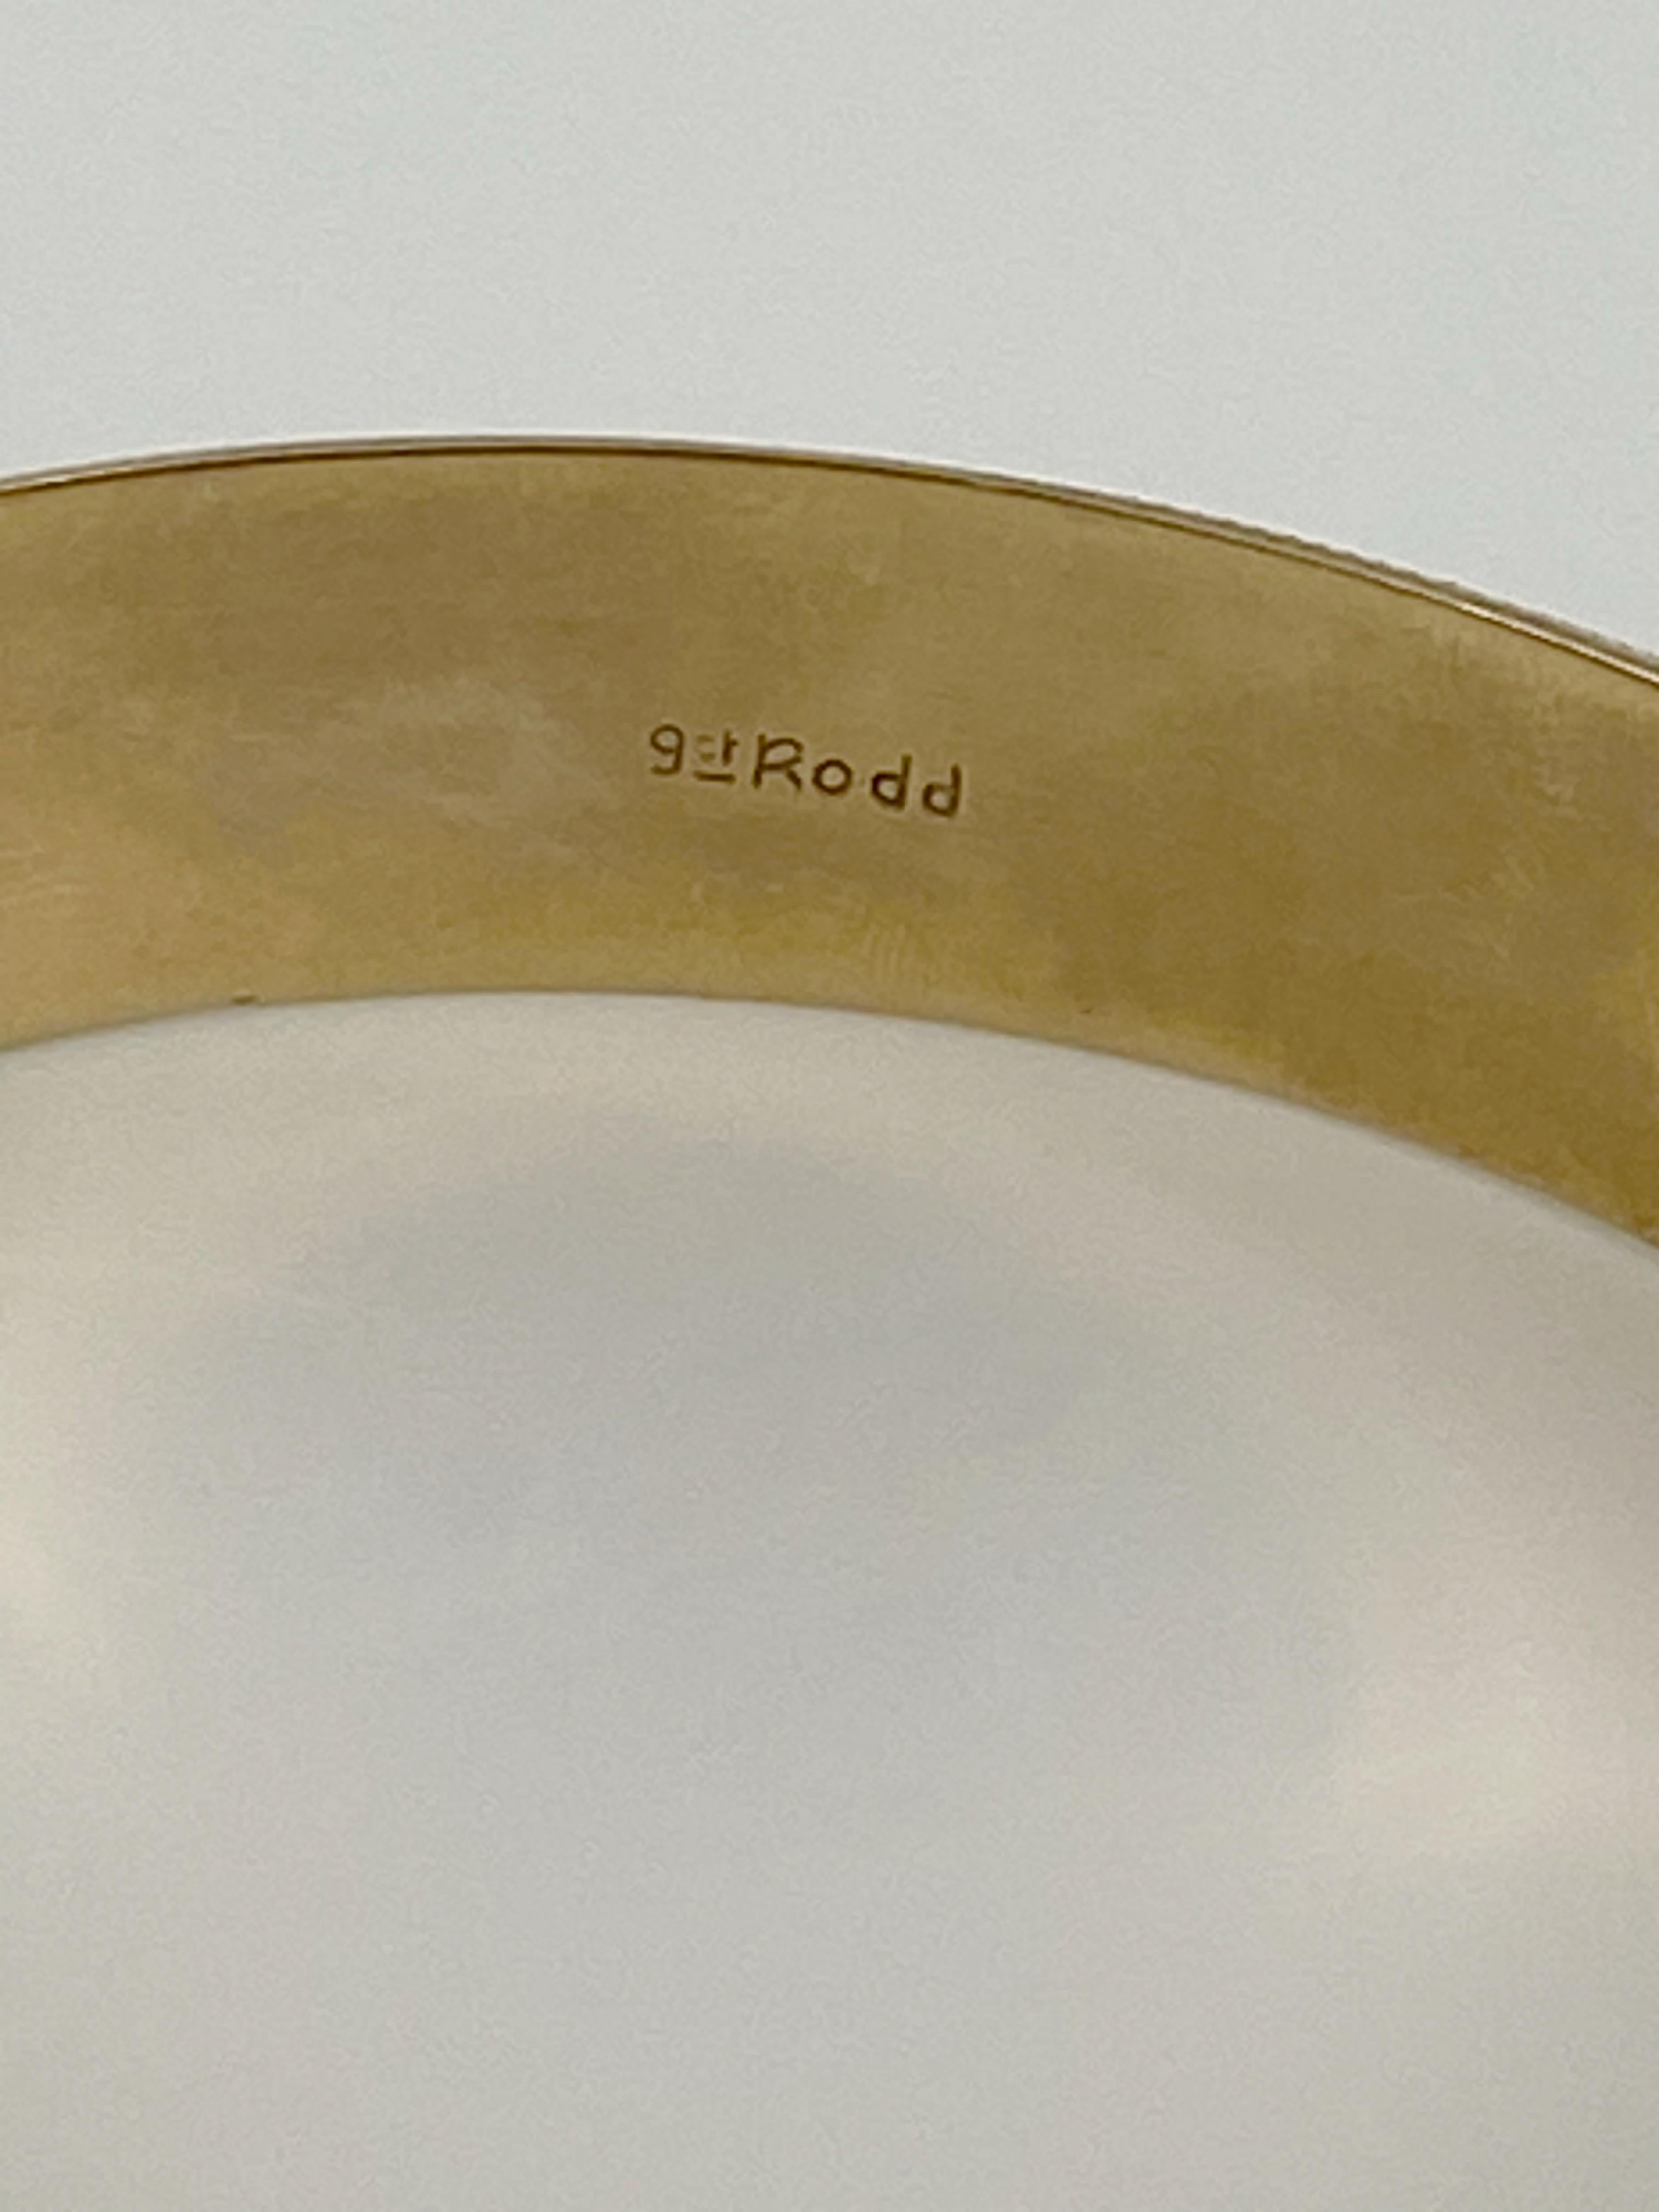 9K Yellow Gold Retro 1950's Finely Engraved Hinged Bangle. Circumference: 21cm. For Sale 4